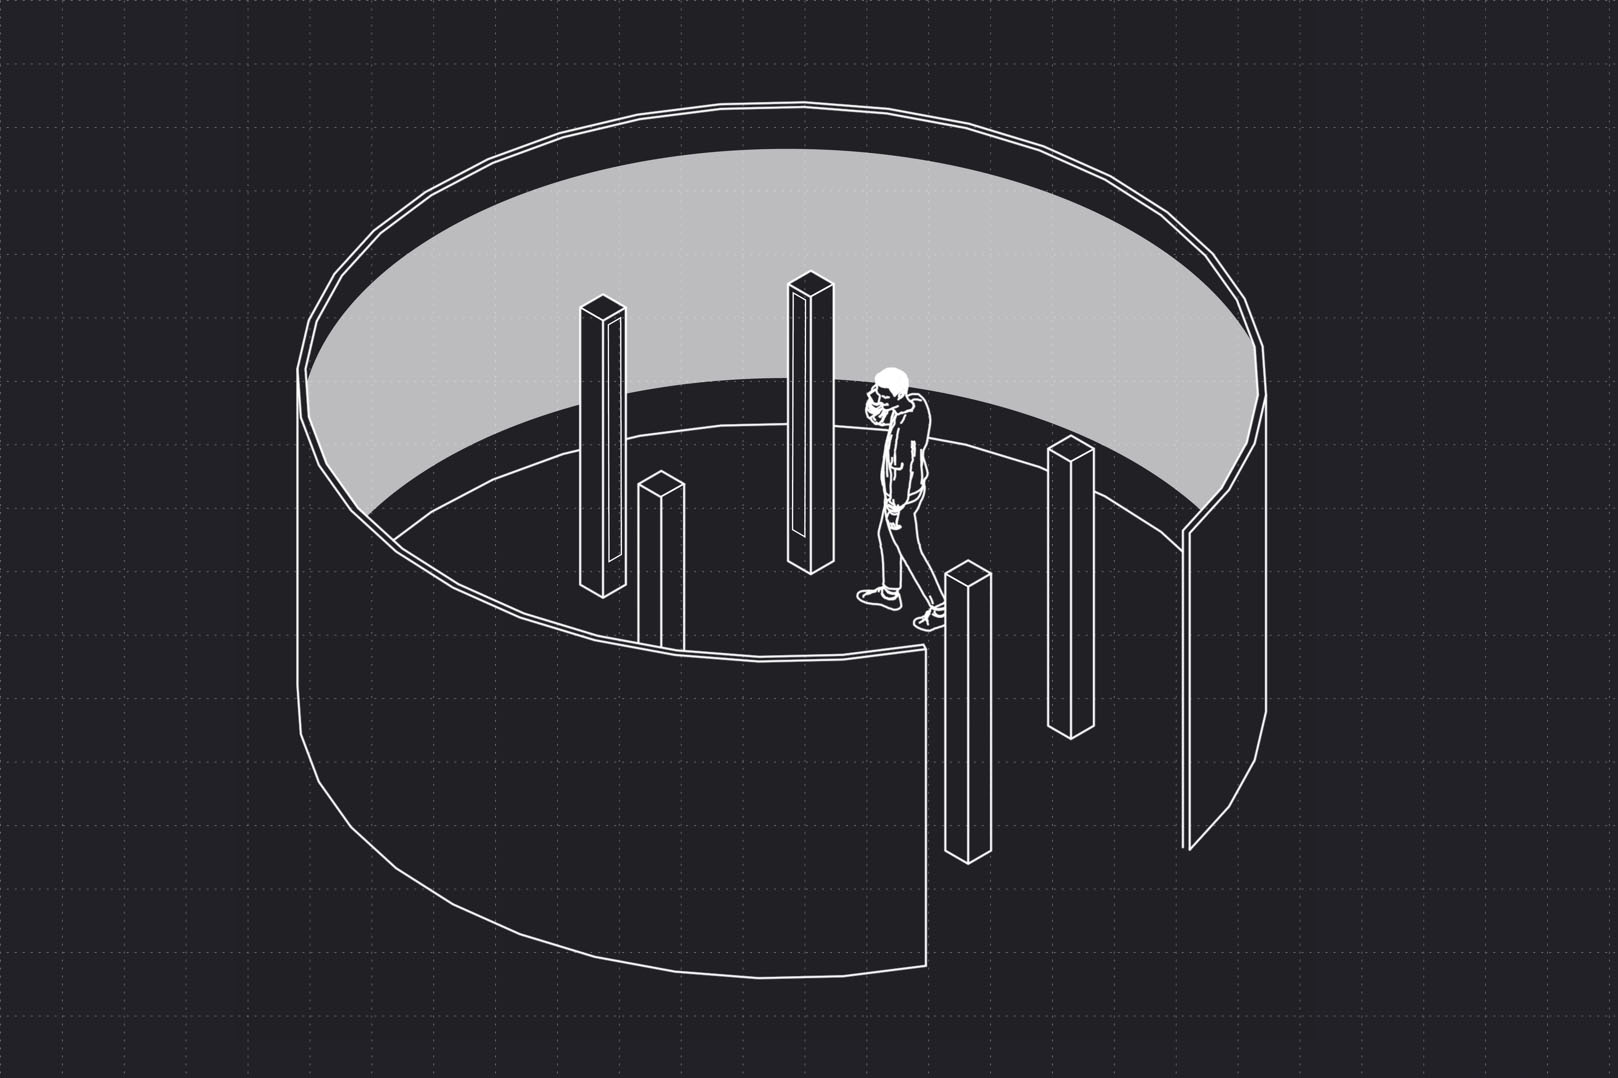 A graphic representation of a person navigating a 360 degree theater